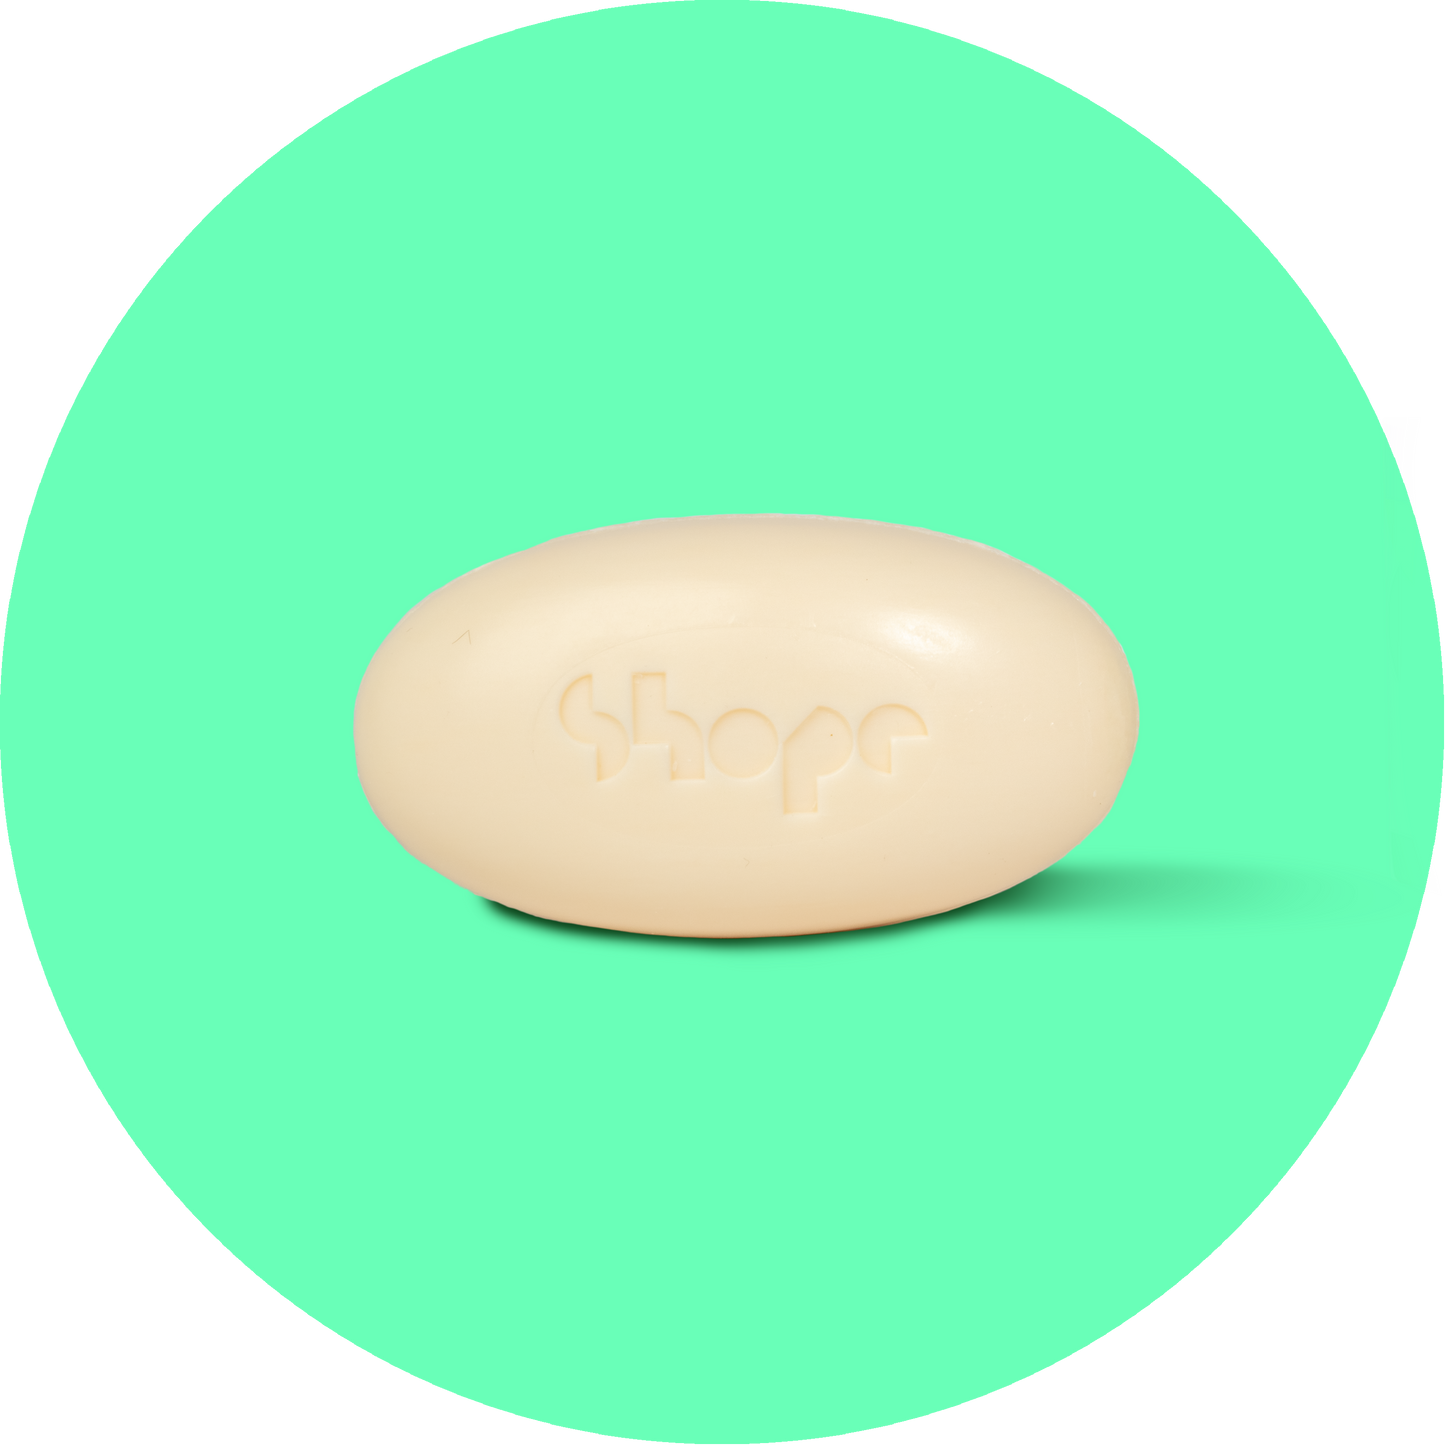 Unboxed SHOPE soap bar against green circle background.